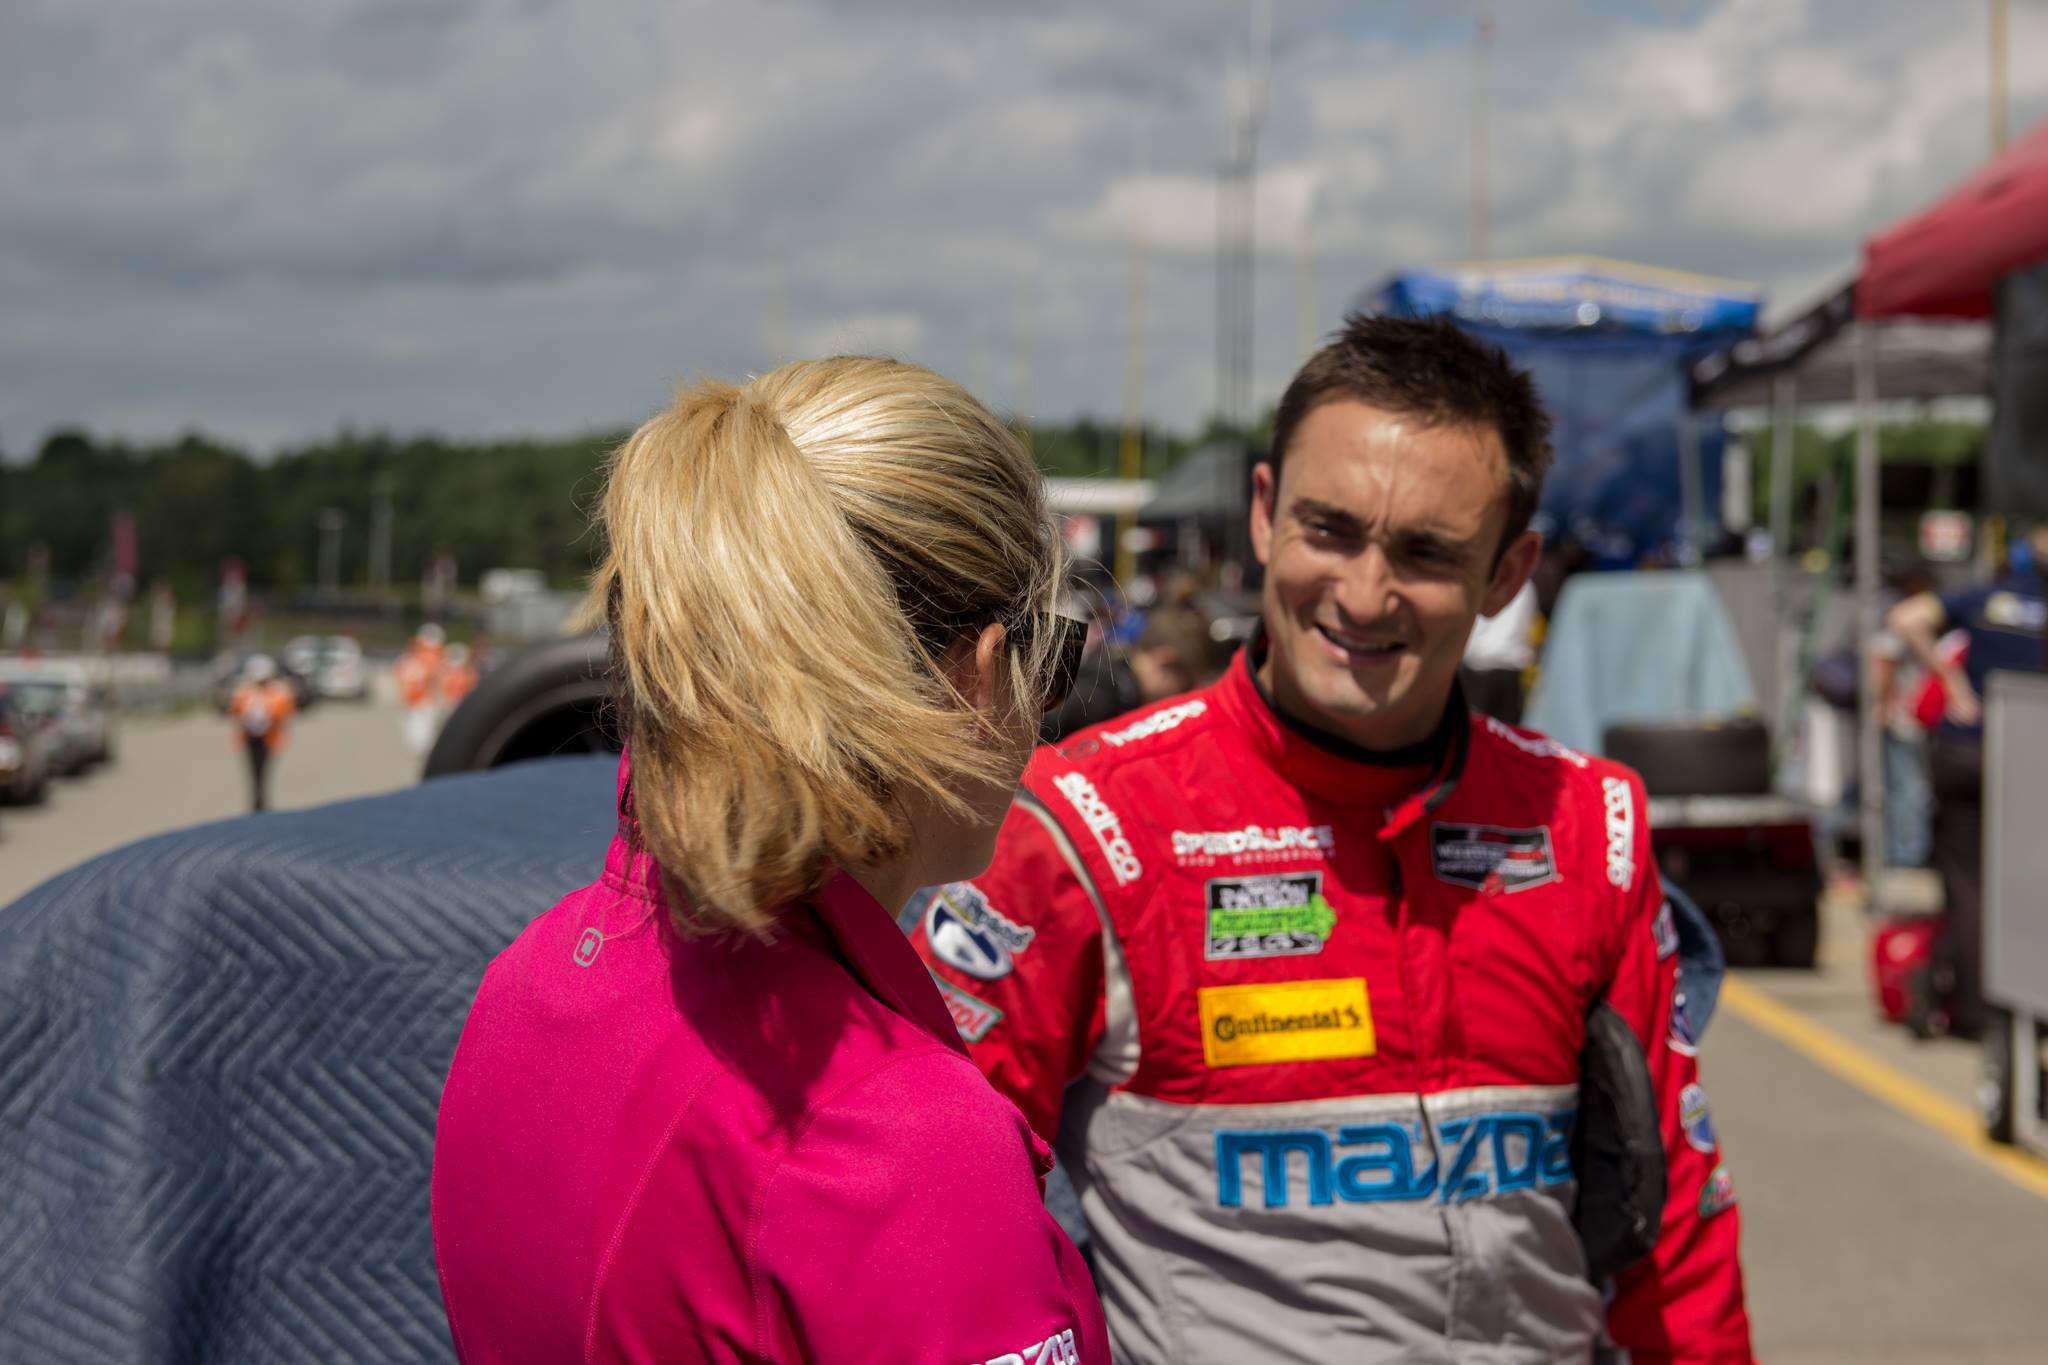 Ashton Harrison was at CTMP for the Mazda Global MX-5 Cup Series. She finished both races to continue a successful season in her pro racing debut. 